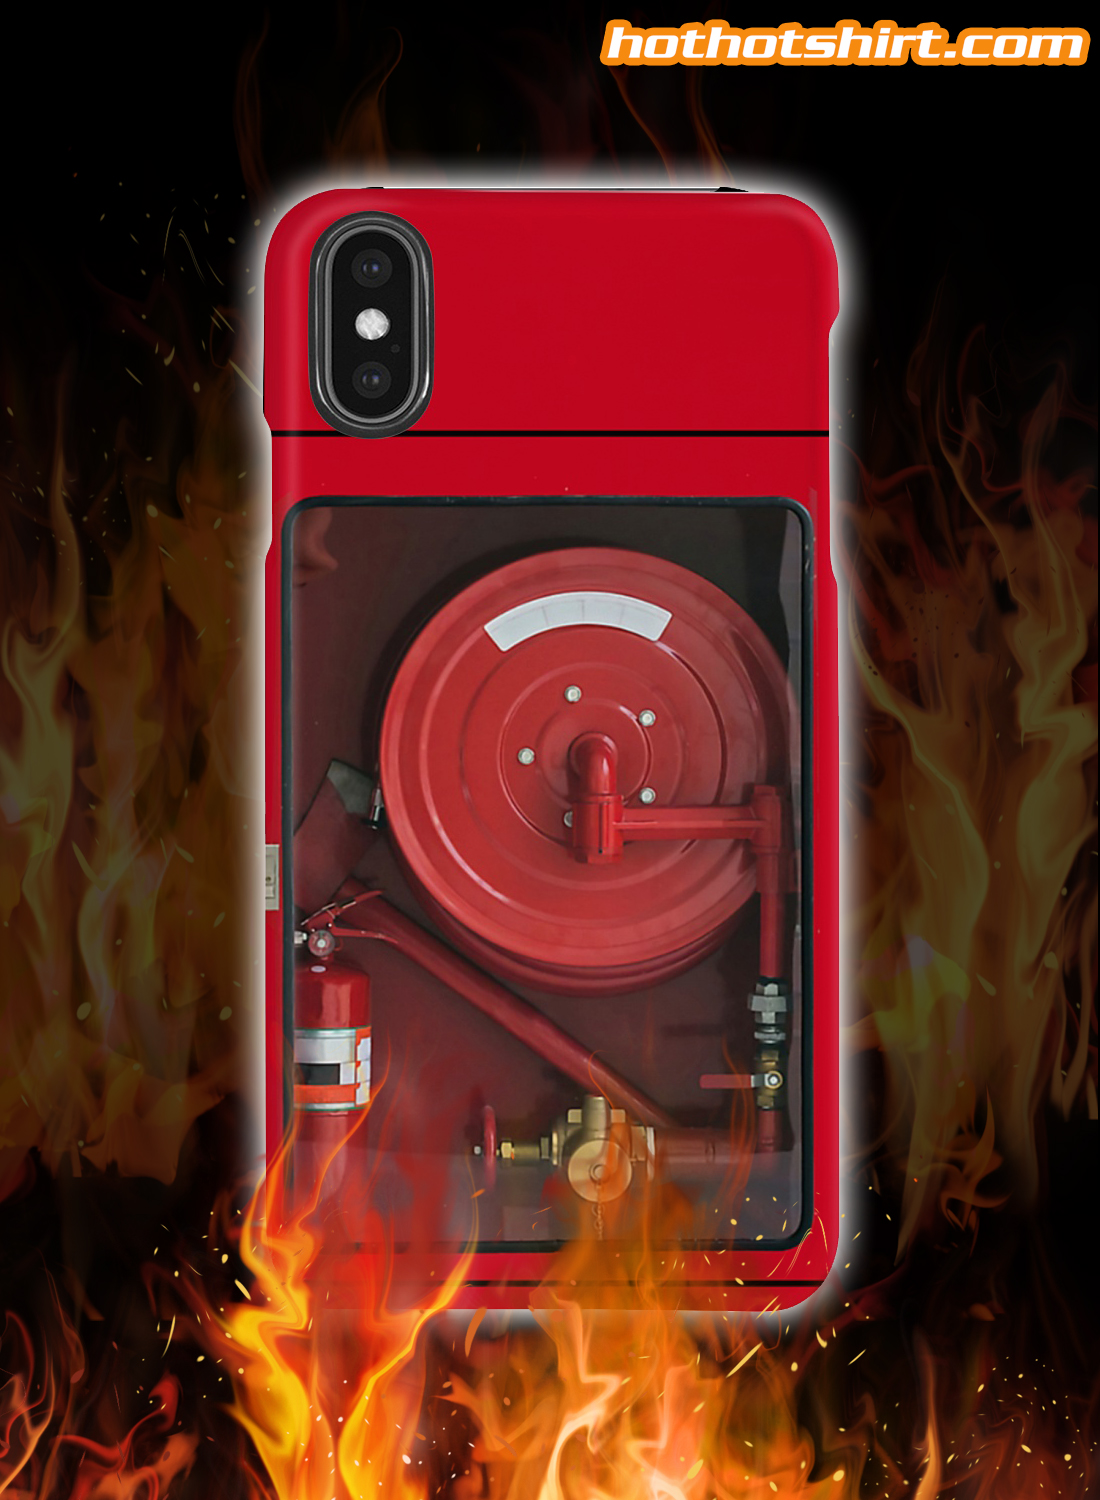 Firefighters hose phone case 2